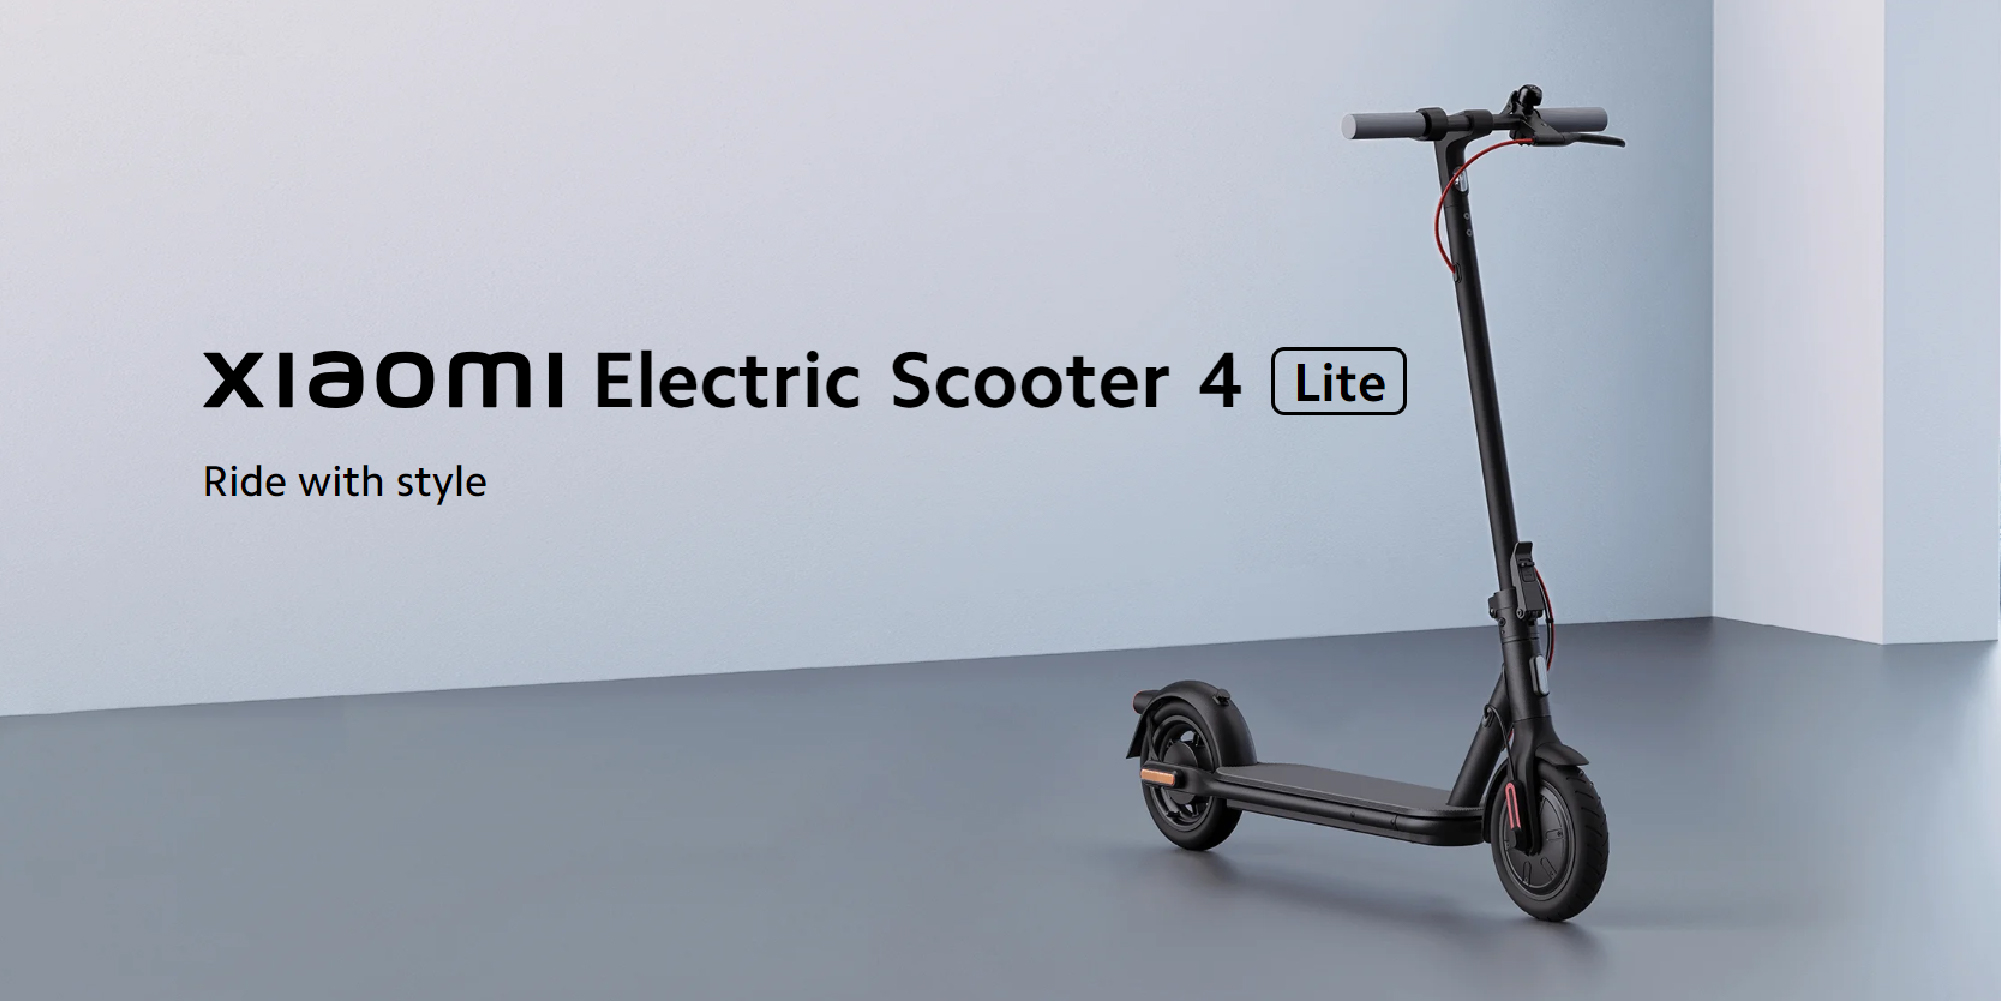 Xiaomi Electric Scooter 4 Lite Black: Dual Brake System, 25 km/h Maximum Speed, and 30 km Travel Distance